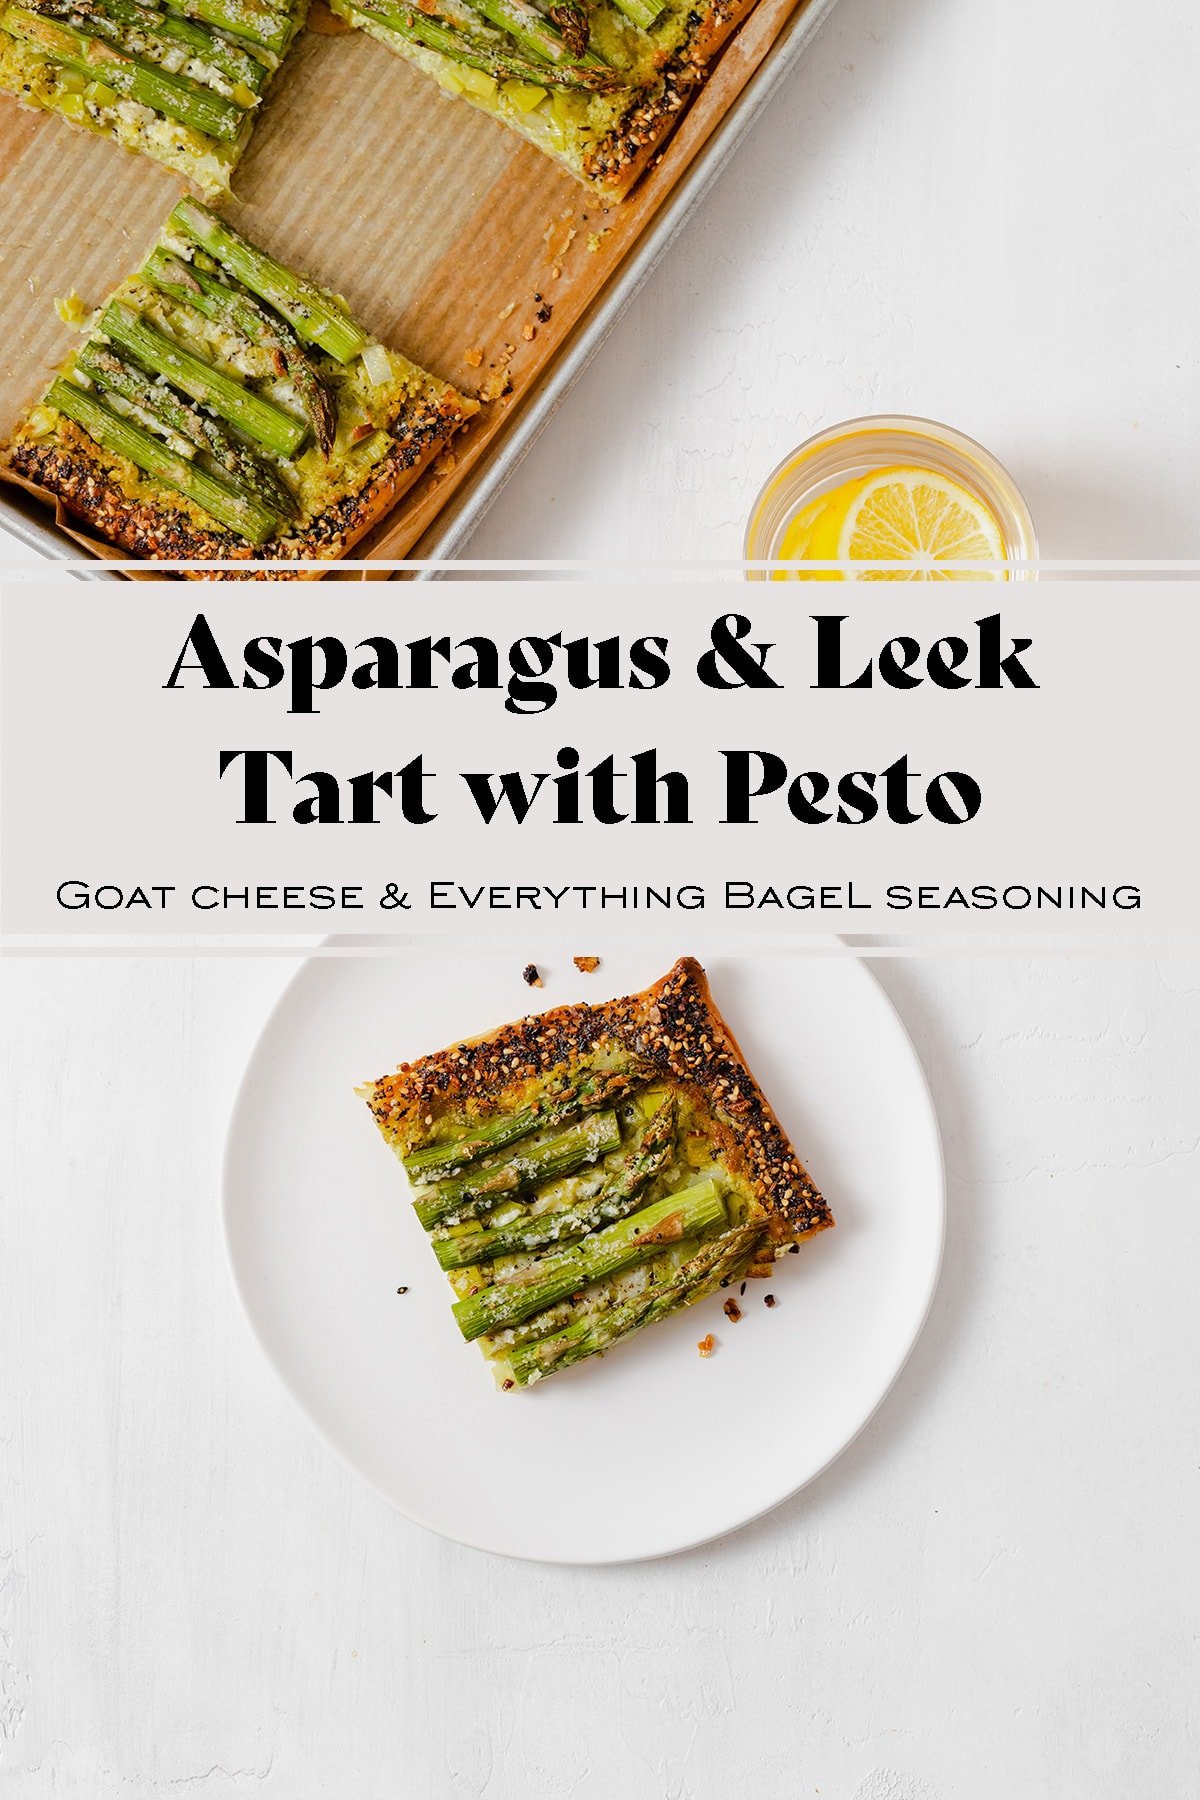 Asparagus Tart with Pesto and Goat Cheese